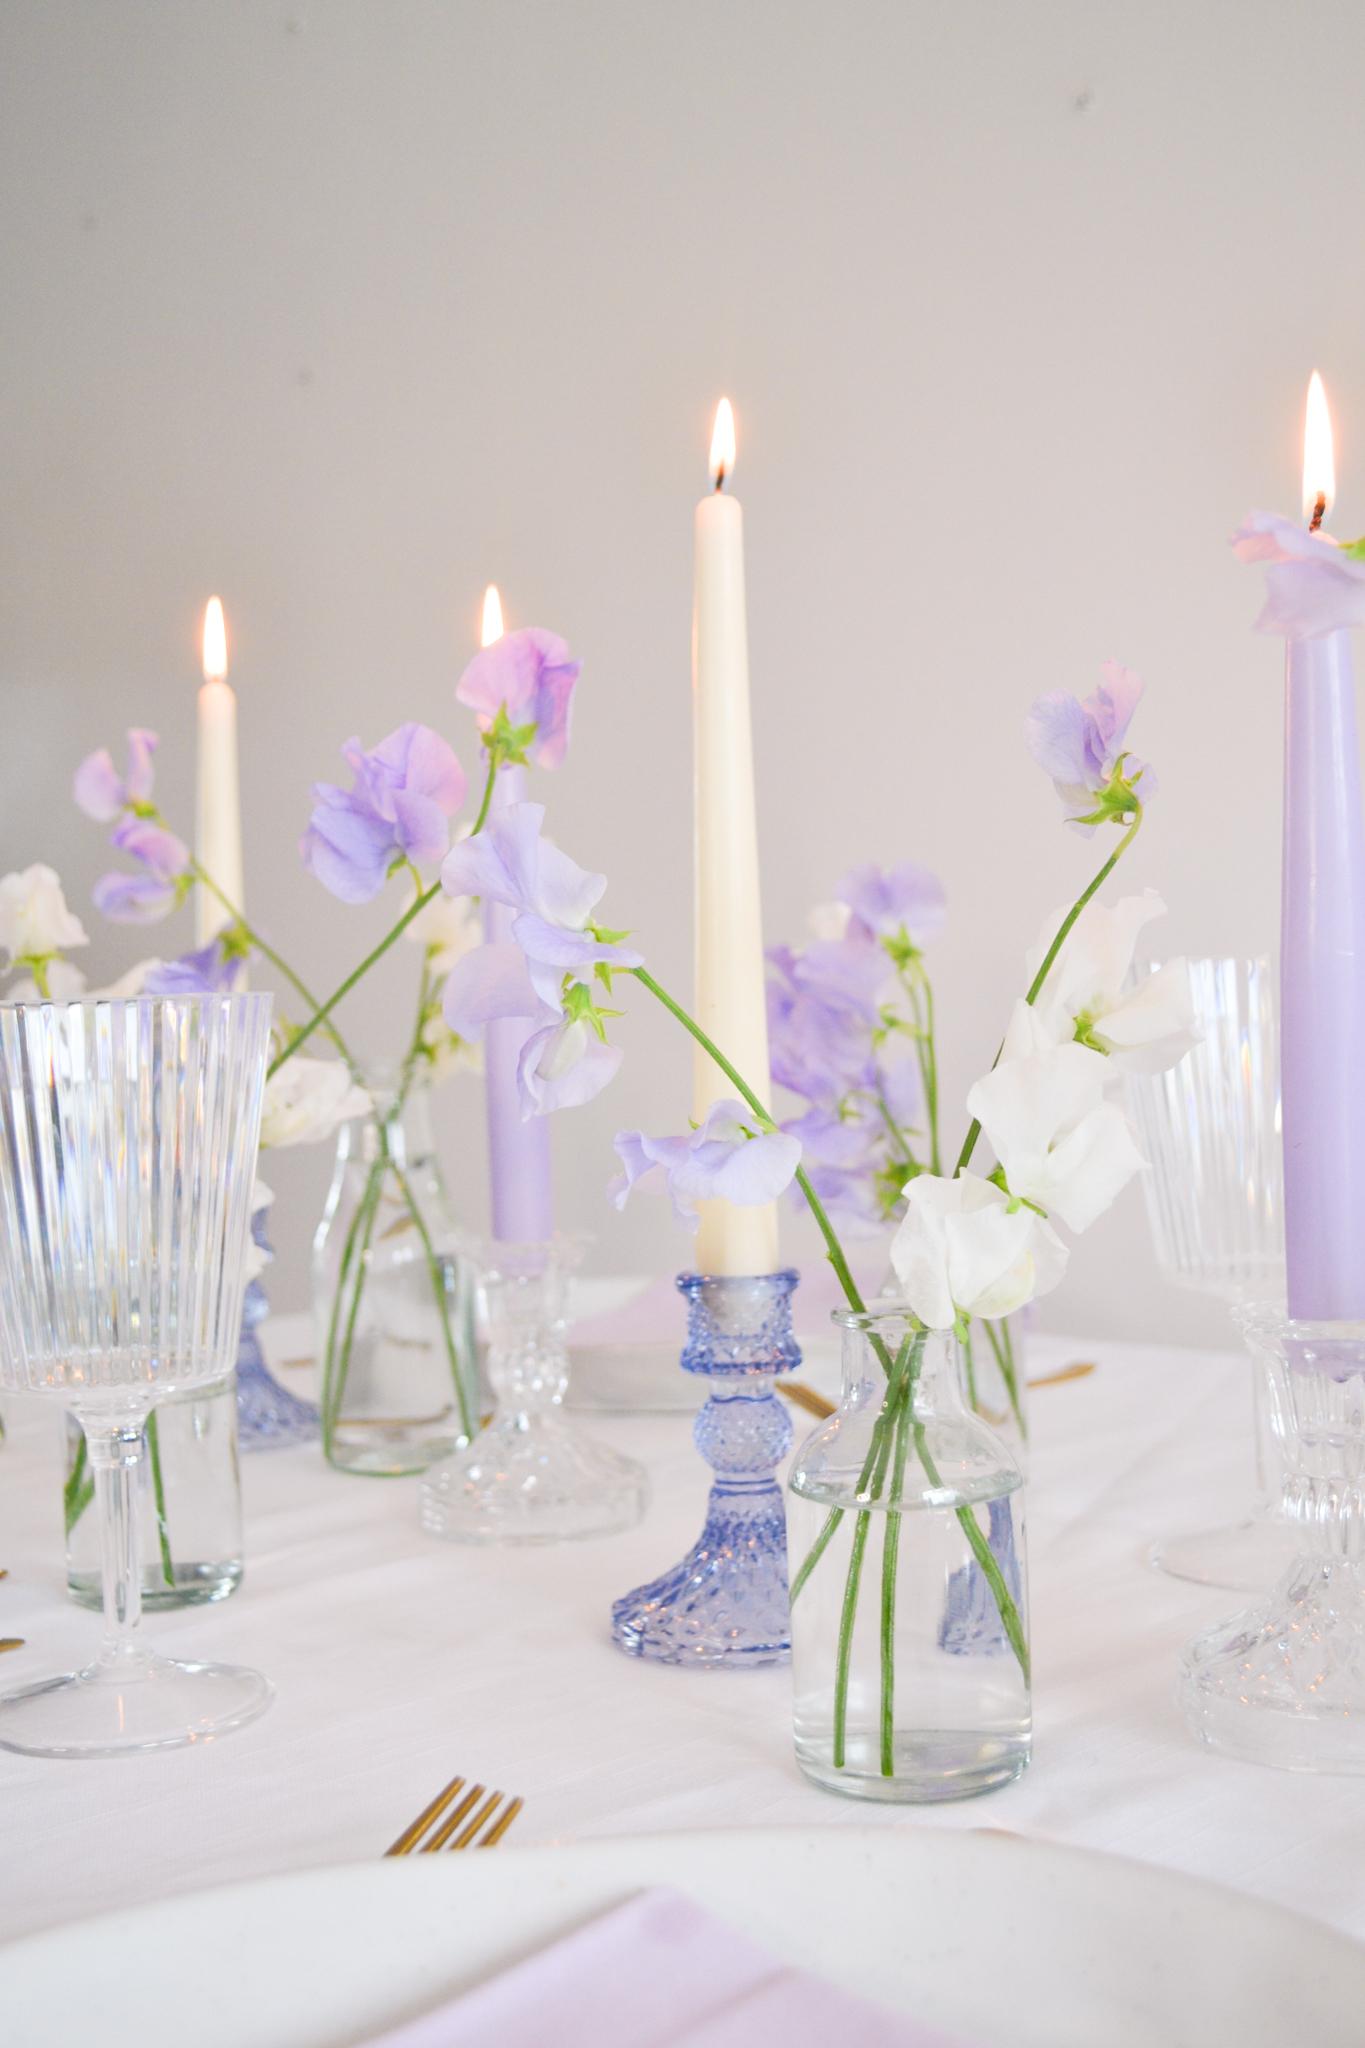 Lilac and white sweet pea table setting with tapered candles